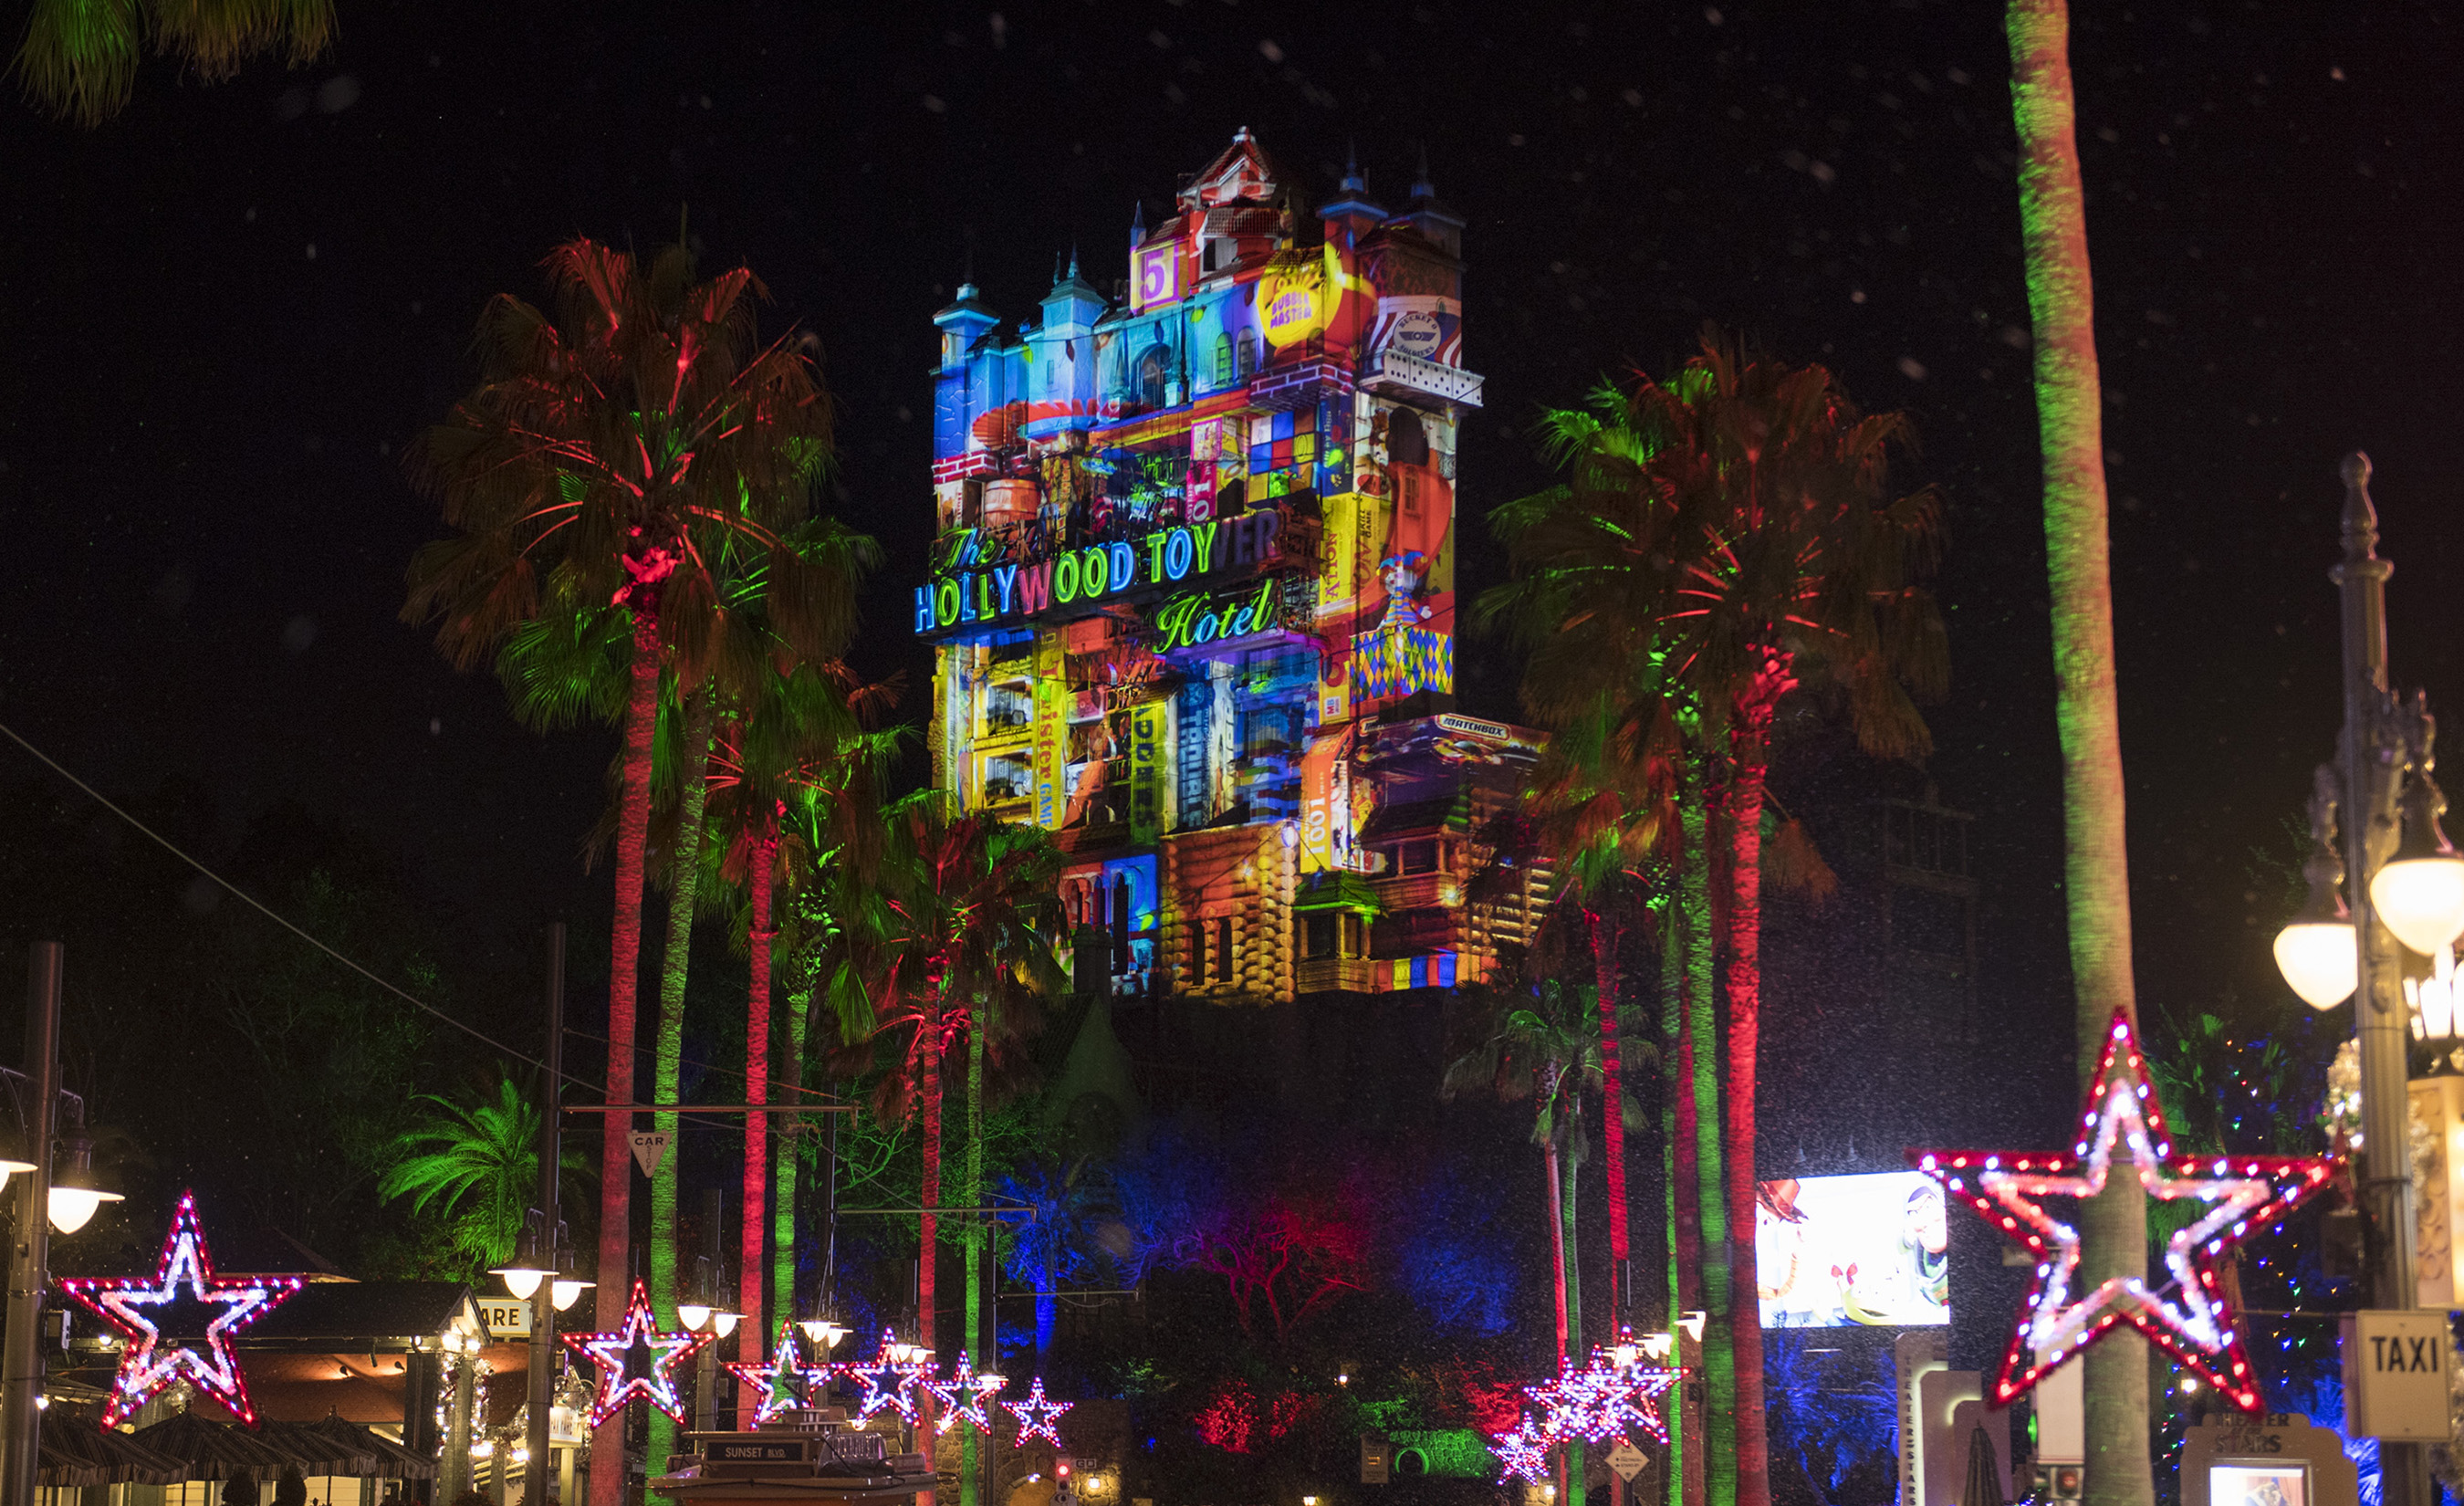 New Holiday Decor and Shows Light Up Disney’s Hollywood Studios - The